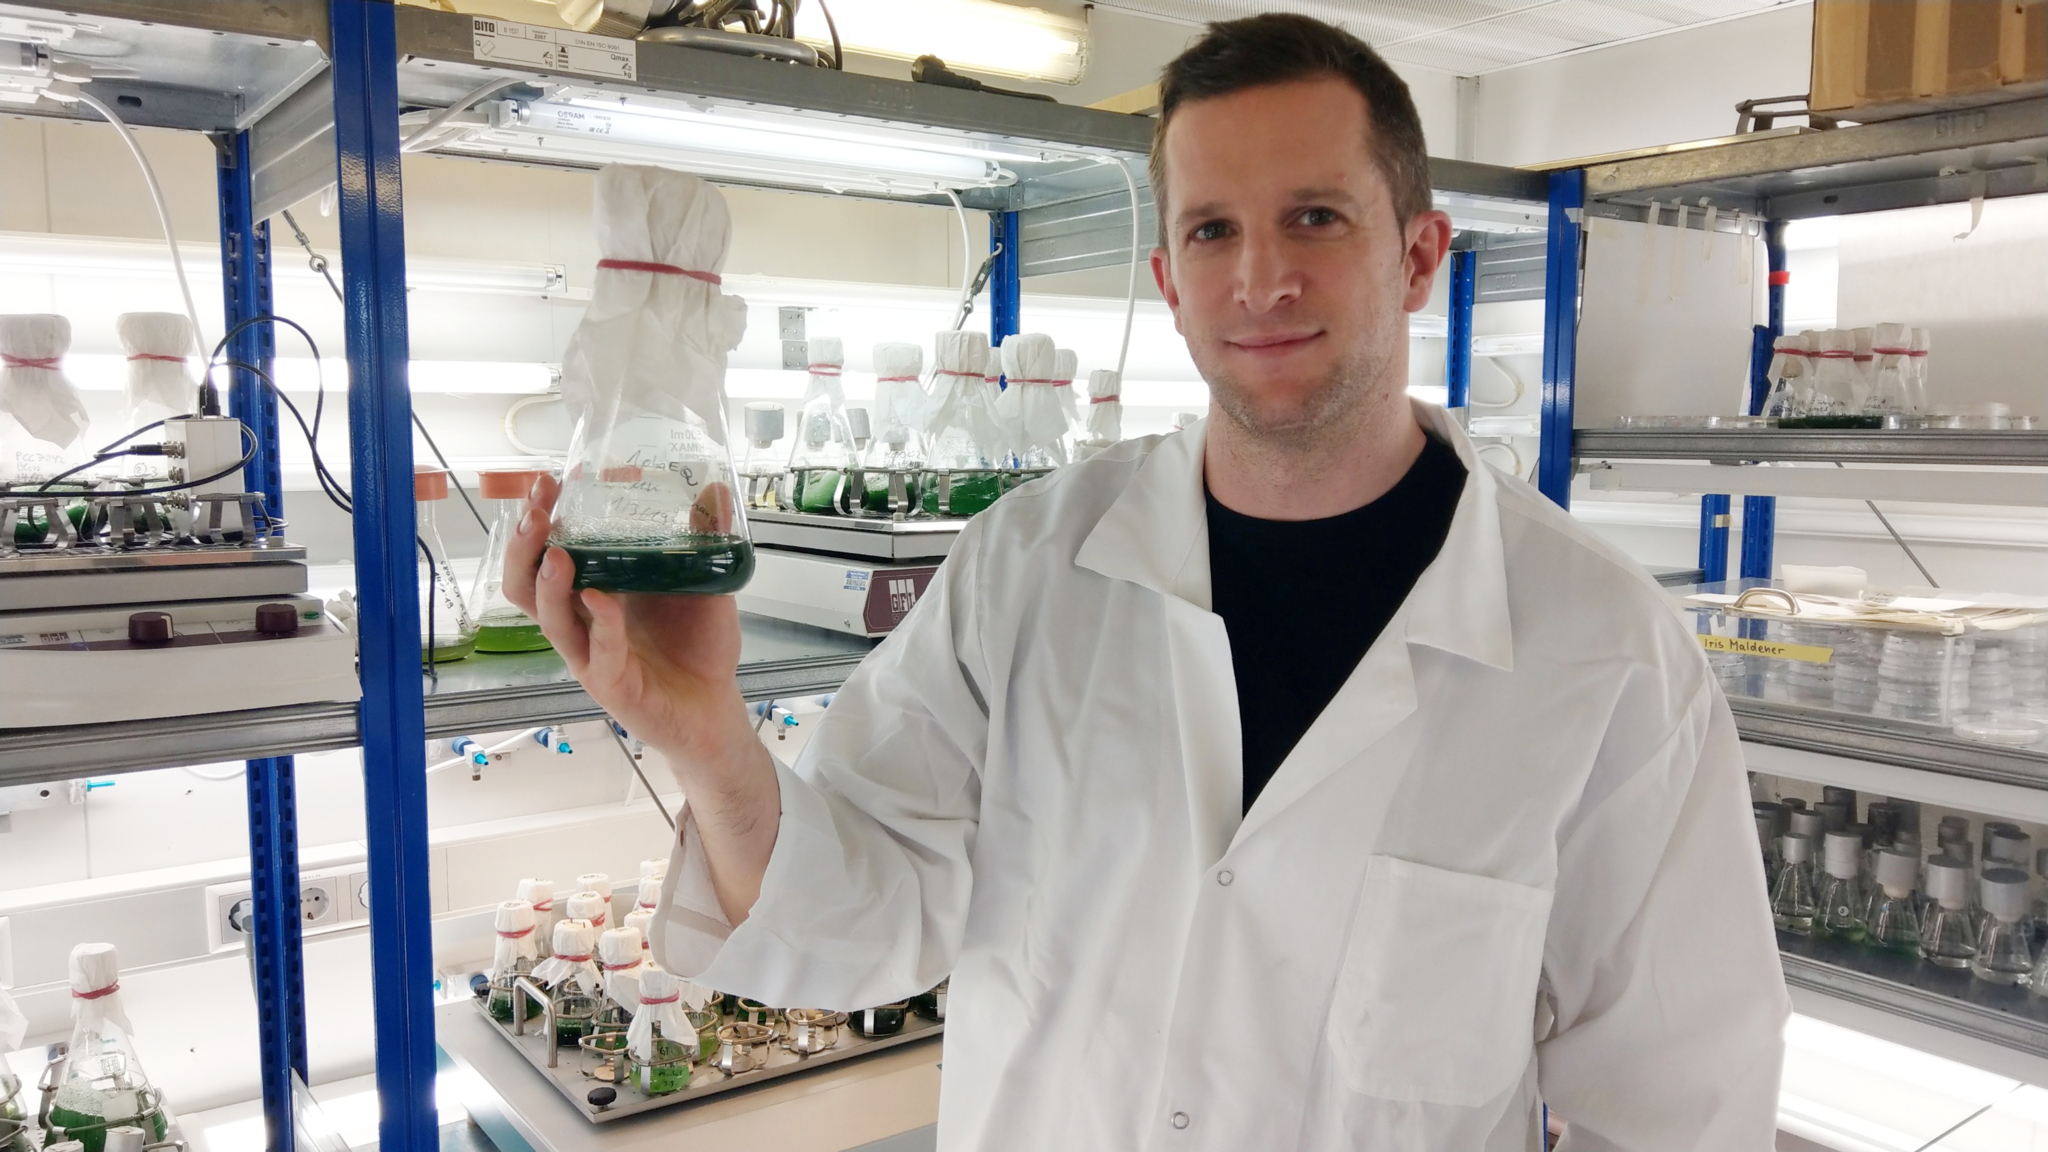 The researcher in the laboratory, holding an Erlenmeyer flask with a green cyanobacteria culture in his hand.